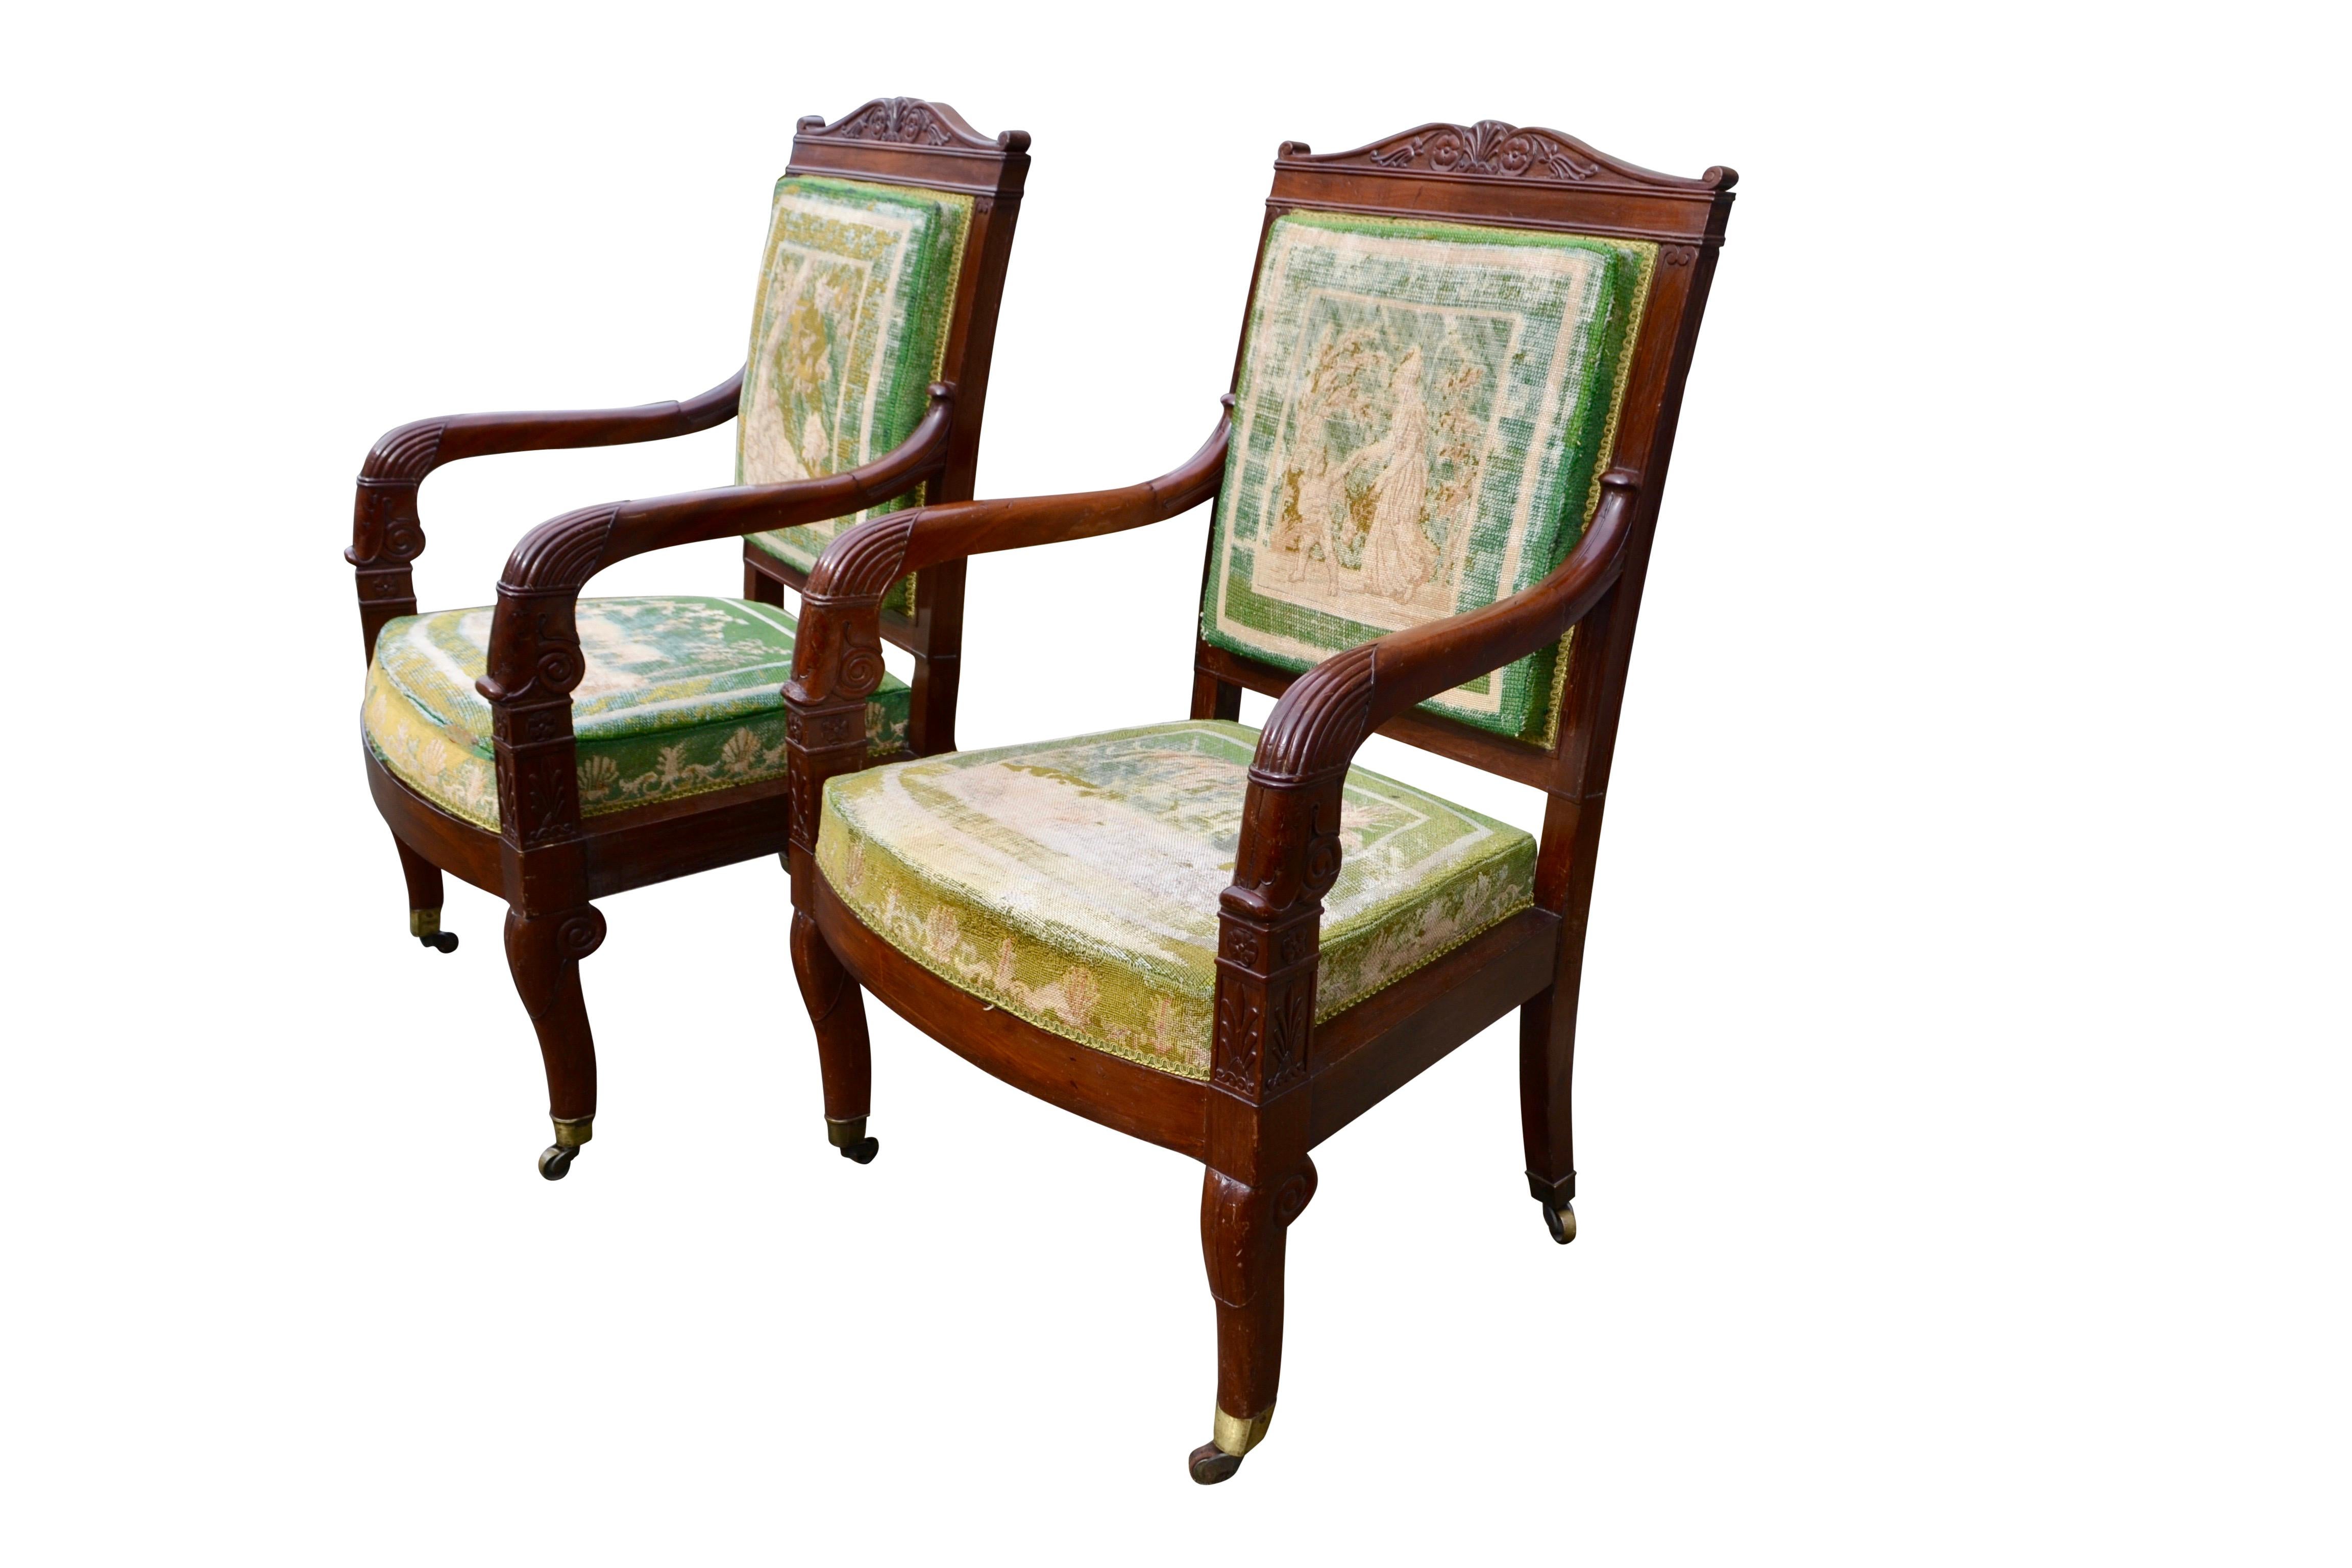 Pair of French Empire Mahogany Armchairs One Stamped J Louis In Good Condition For Sale In Vancouver, British Columbia